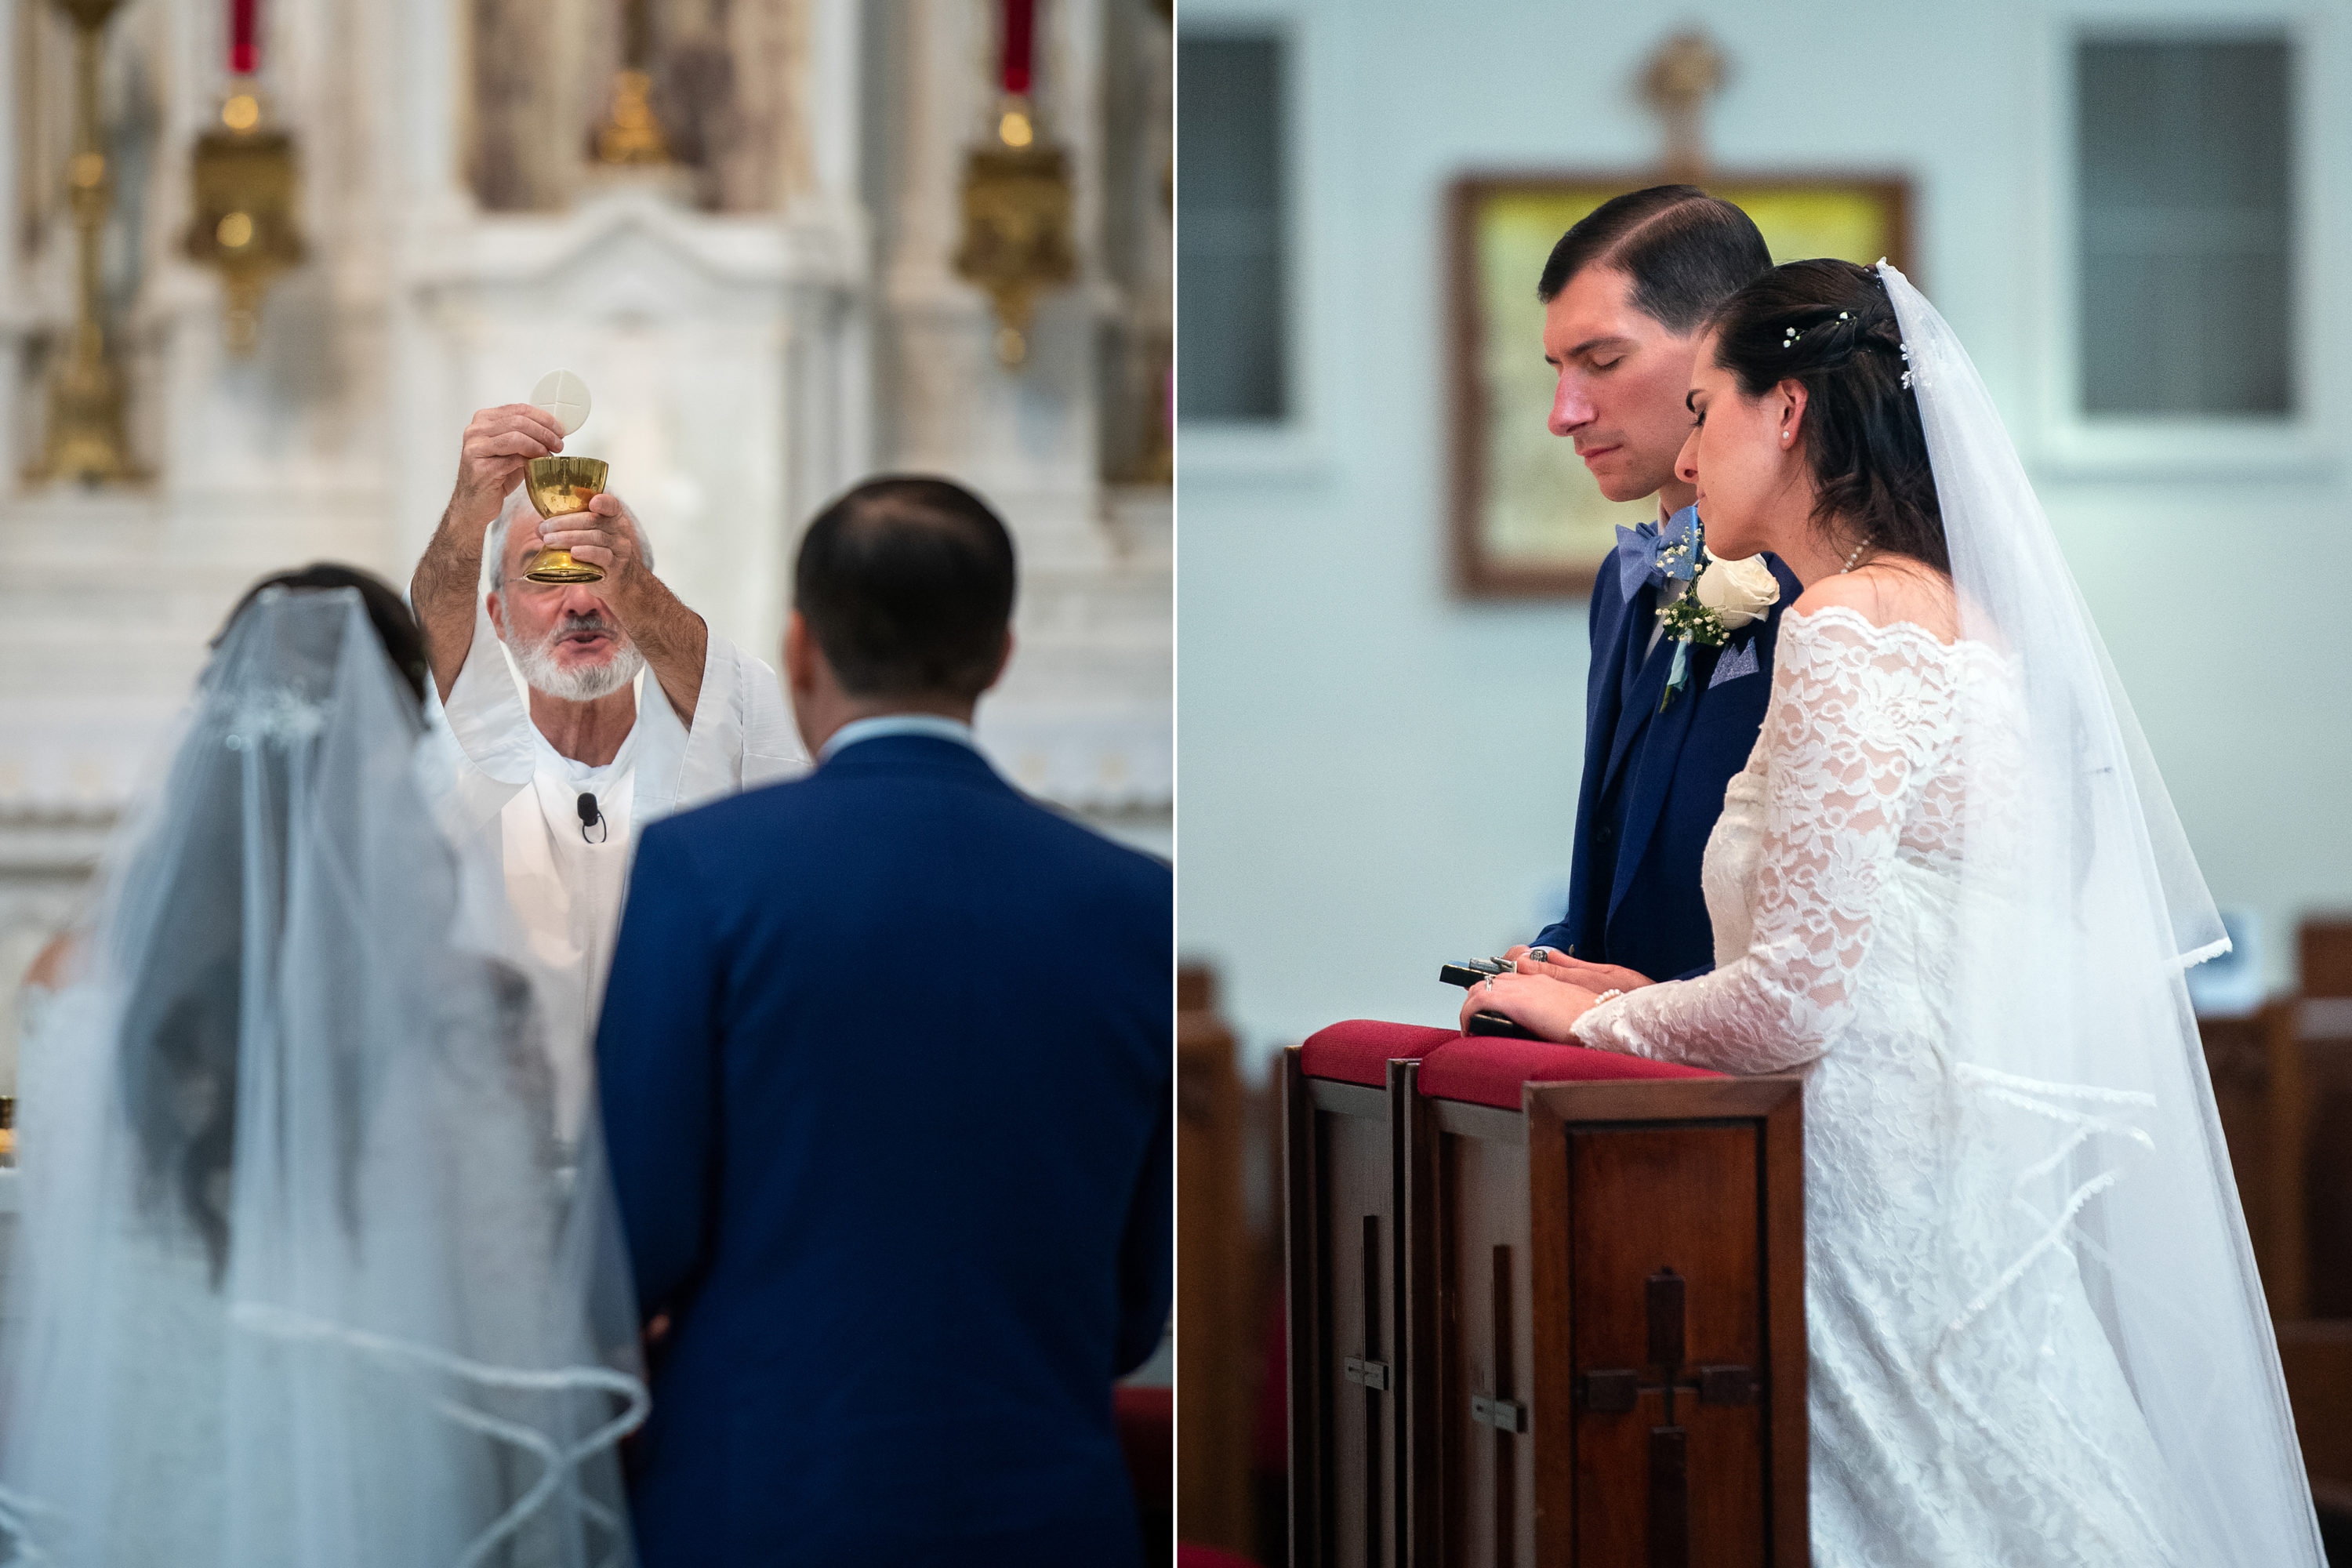 Bride and groom pray during their wedding at the Cathedral Basilica of the Immaculate Conception in Denver, Colorado.